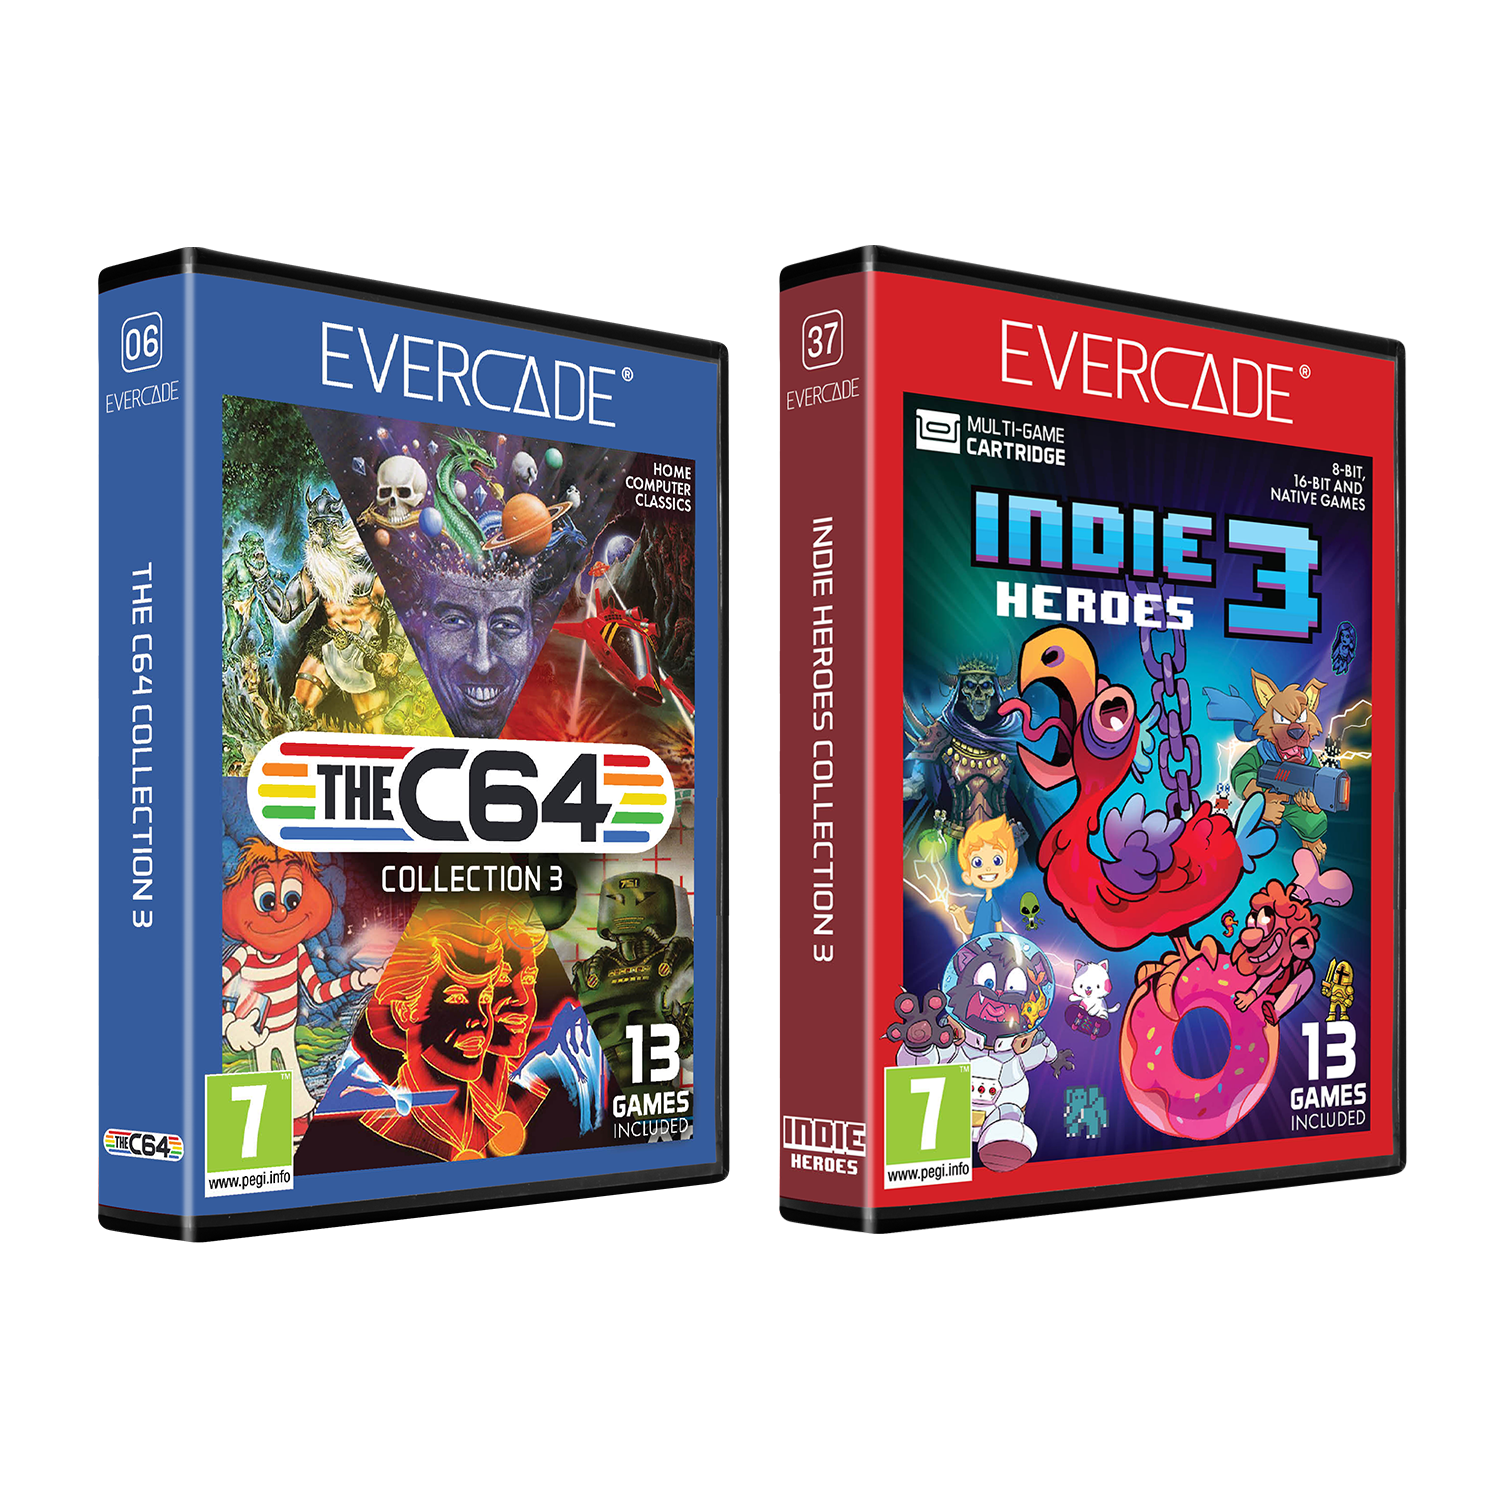 Indie Heroes Collection 3 and THEC64 Collection 3 Double Pack for Evercade